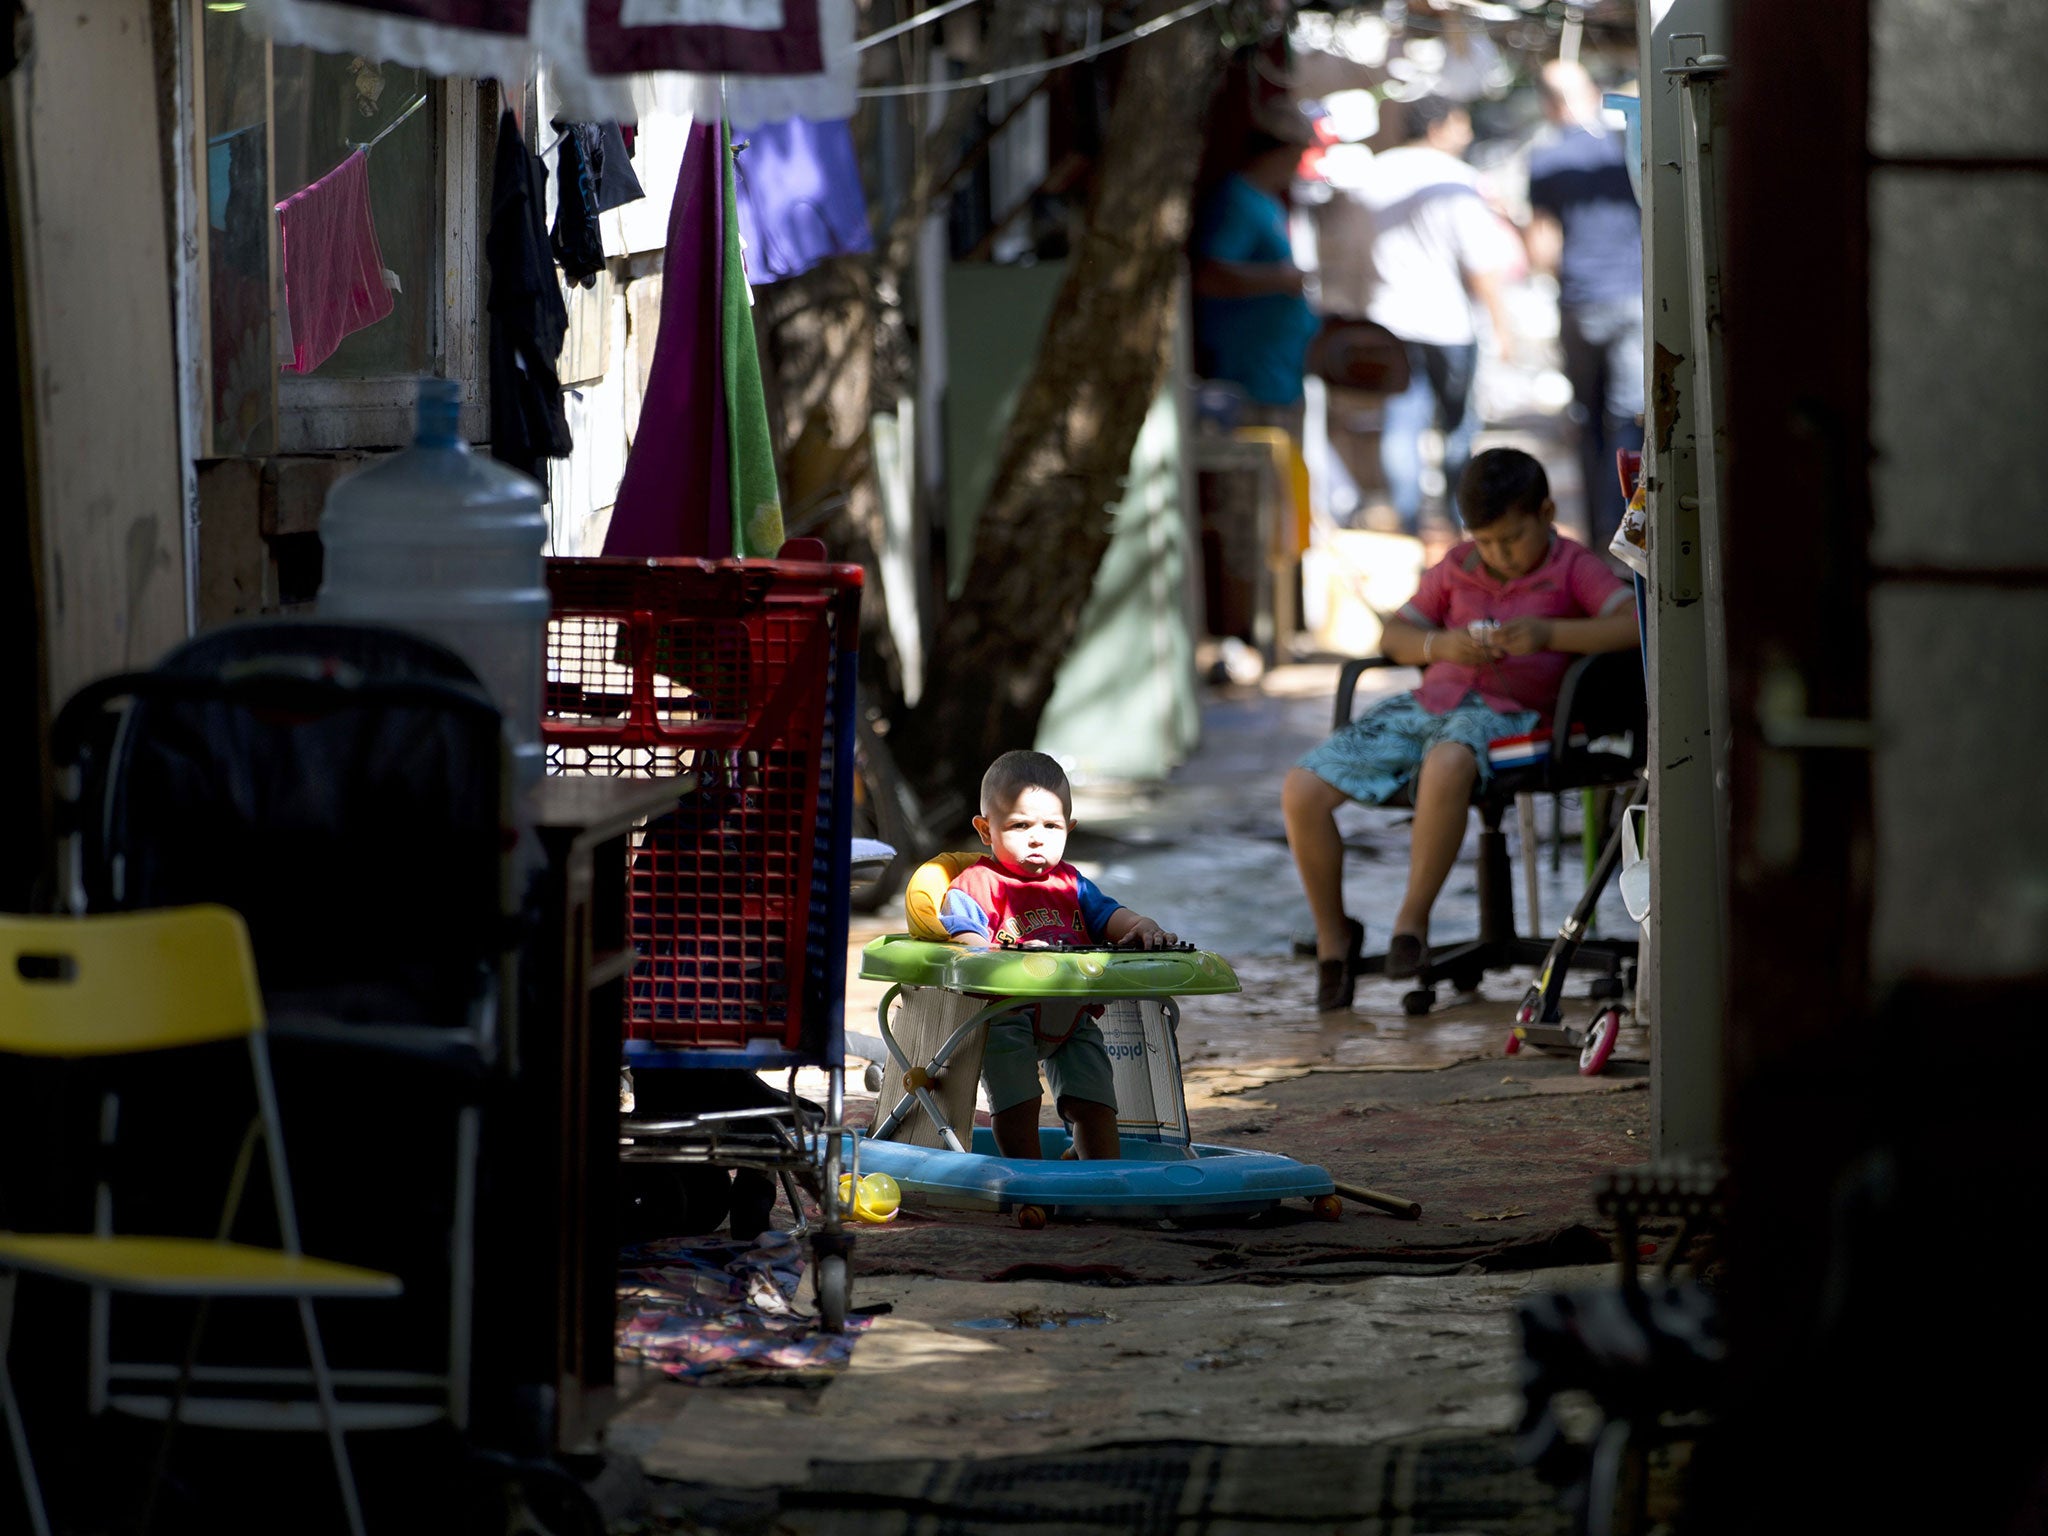 Children sit in a walkway inside the Samaritan shantytown. Volunteer groups have offered to improve sanitation and safety in the settlement but the council says their plans are not viable